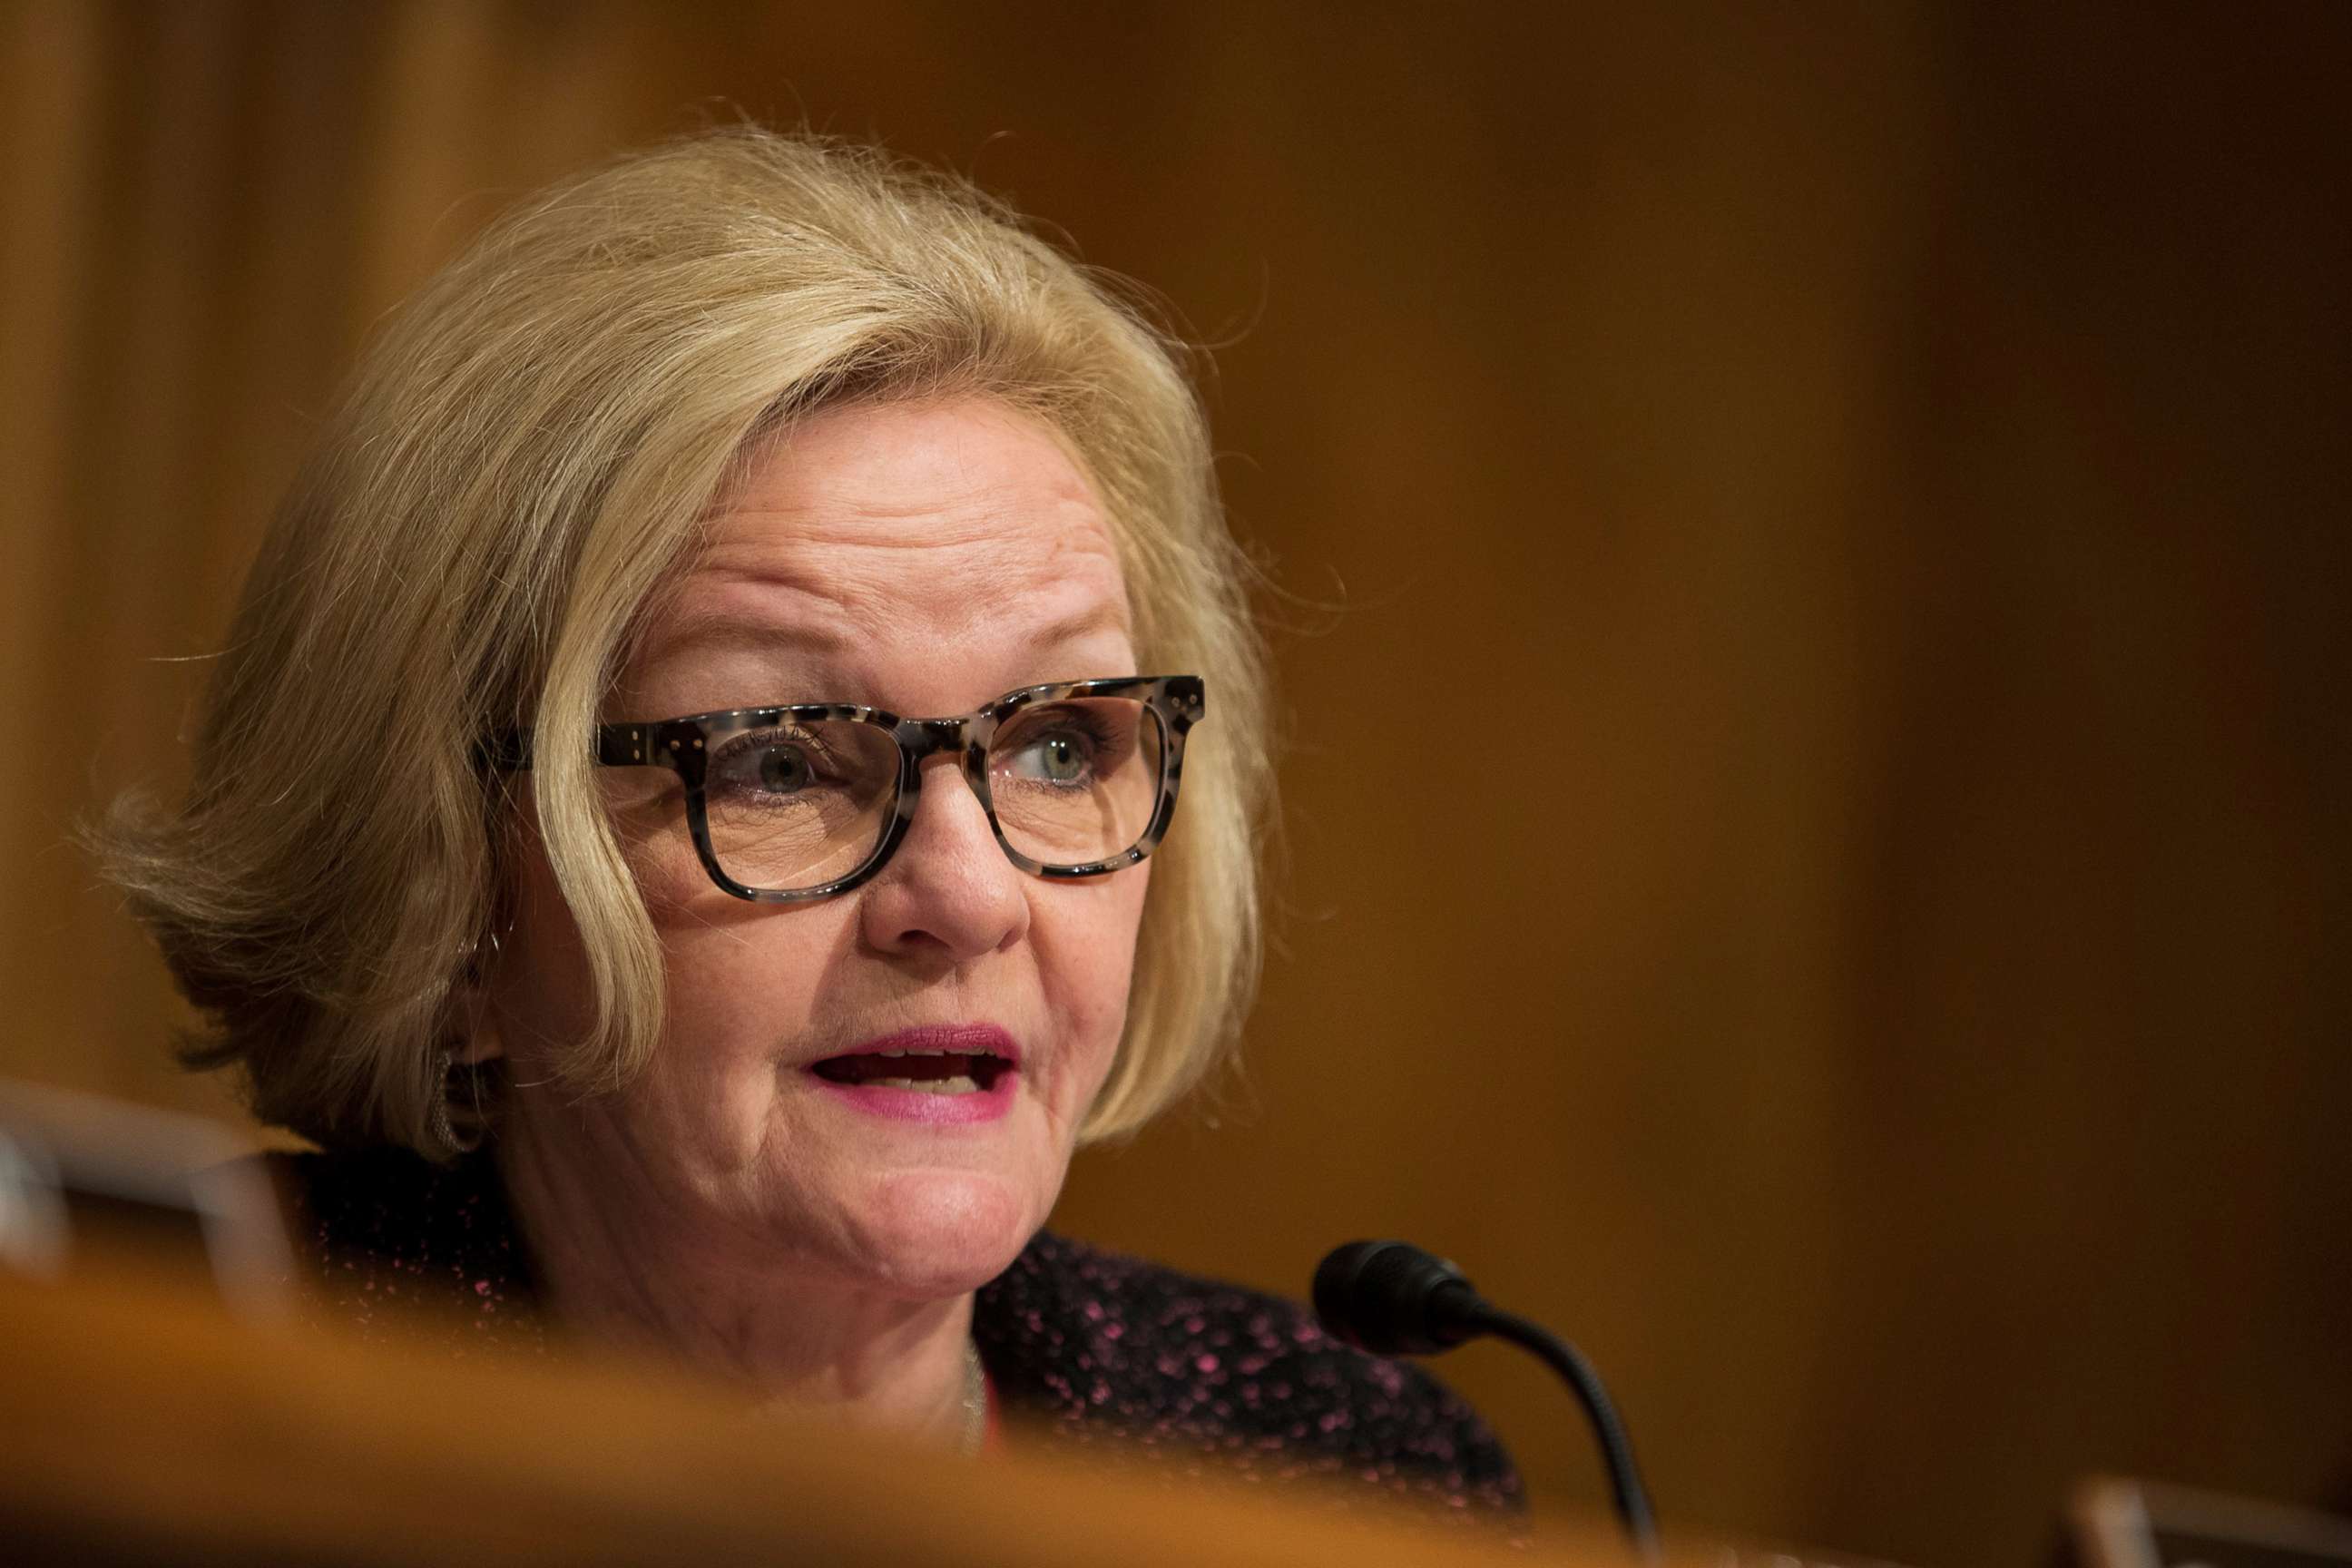 PHOTO: Senate Homeland Ranking Member Sen. Claire McCaskill speaks during a committee hearing on April 5, 2017 on Capitol Hill in Washington.